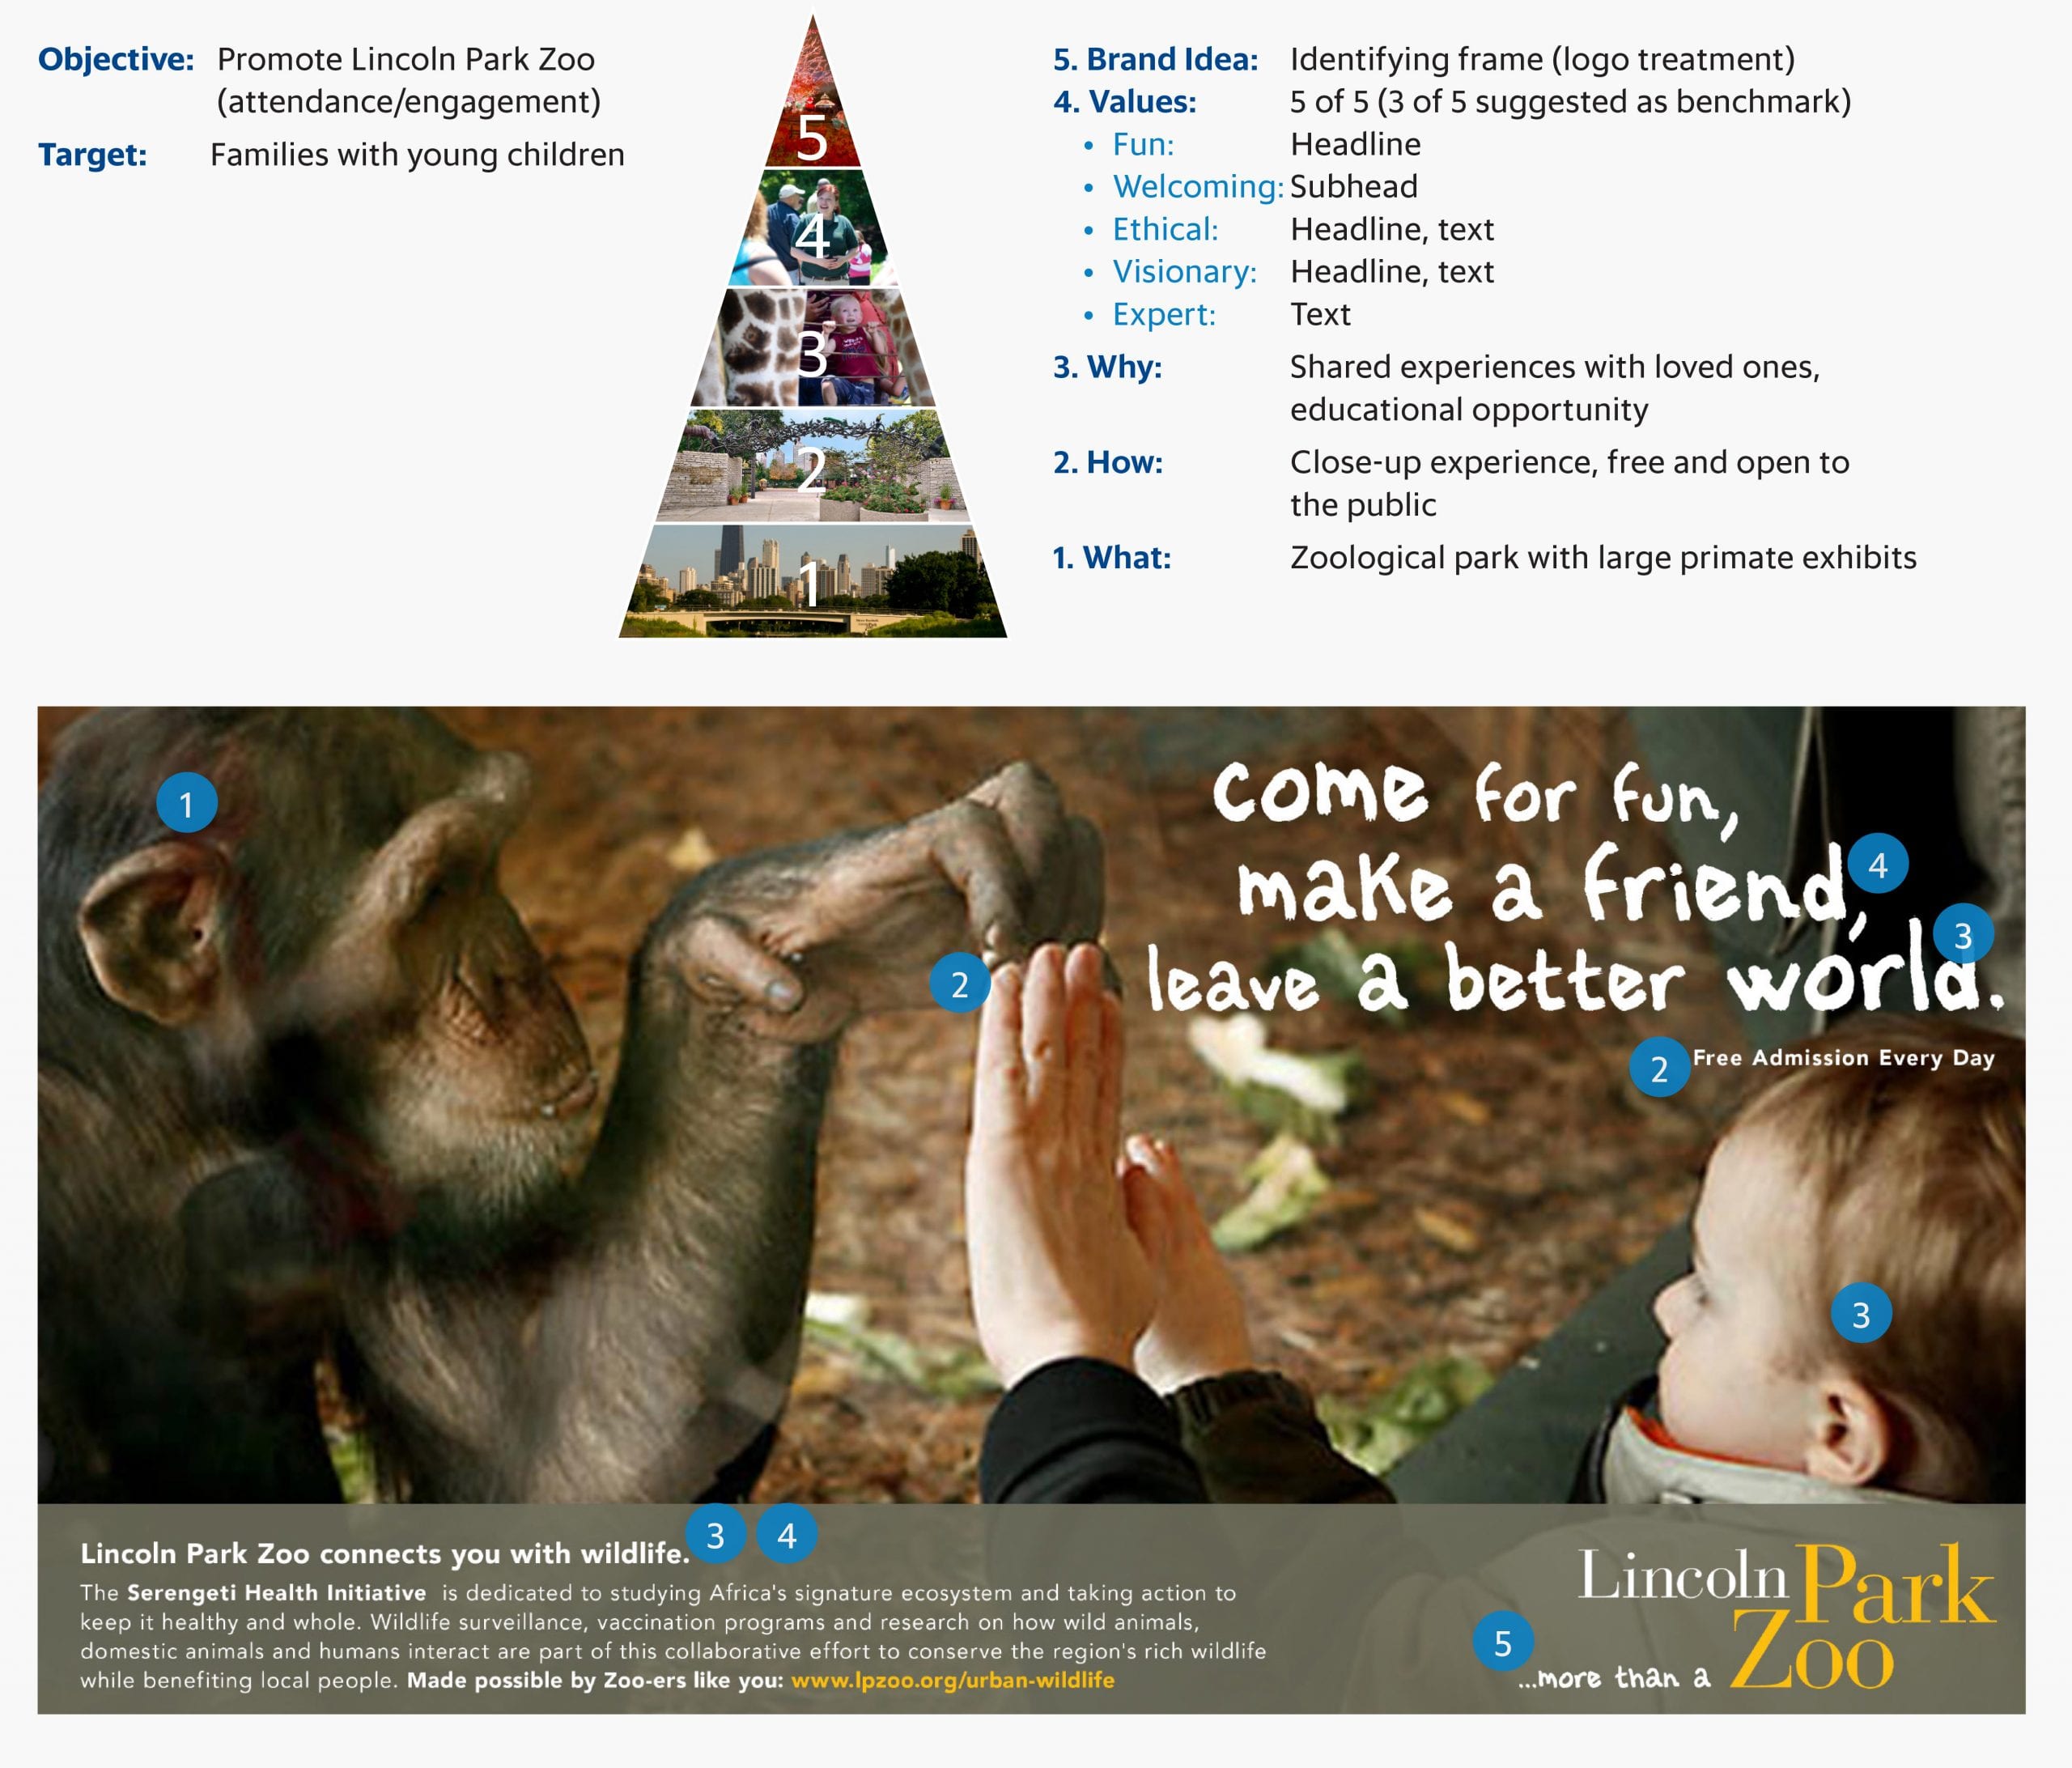 http://Lincoln%20Park%20Zoo%20nonprofit%20advertising